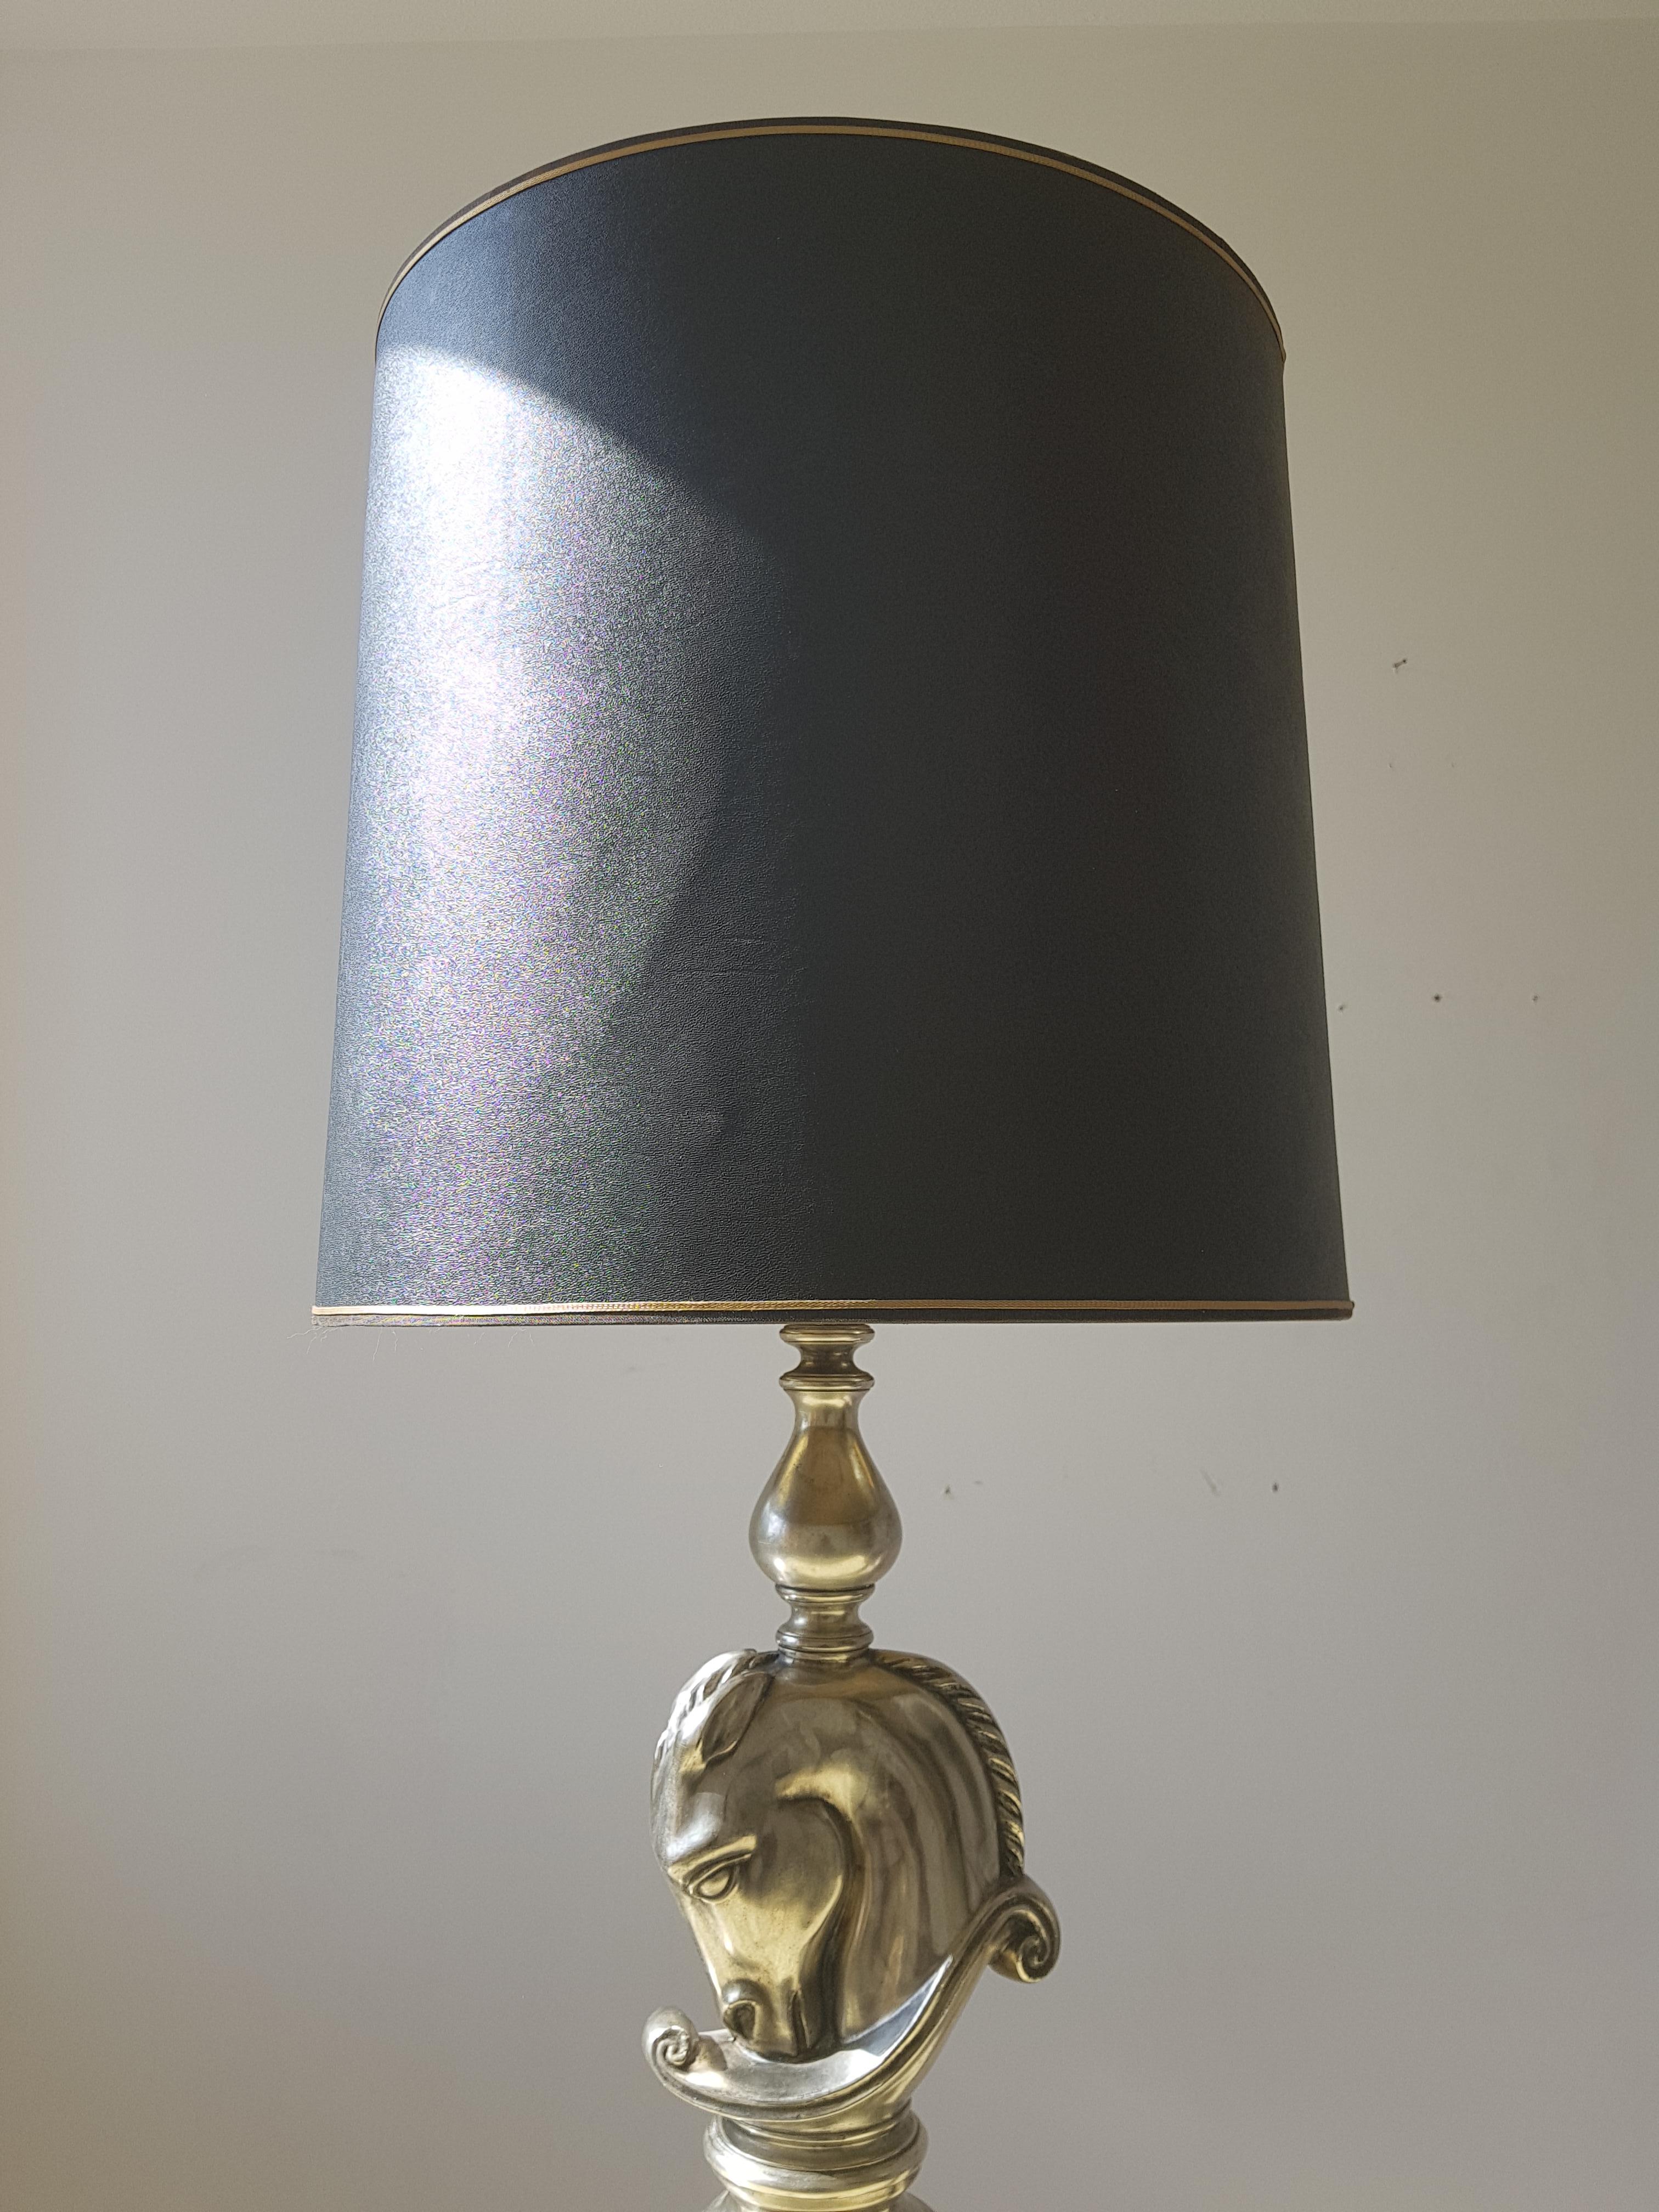 Hollywood Regency Vintage Silver Plated Horsehead Floor and Table Lamp by Deknudt, 1970s For Sale